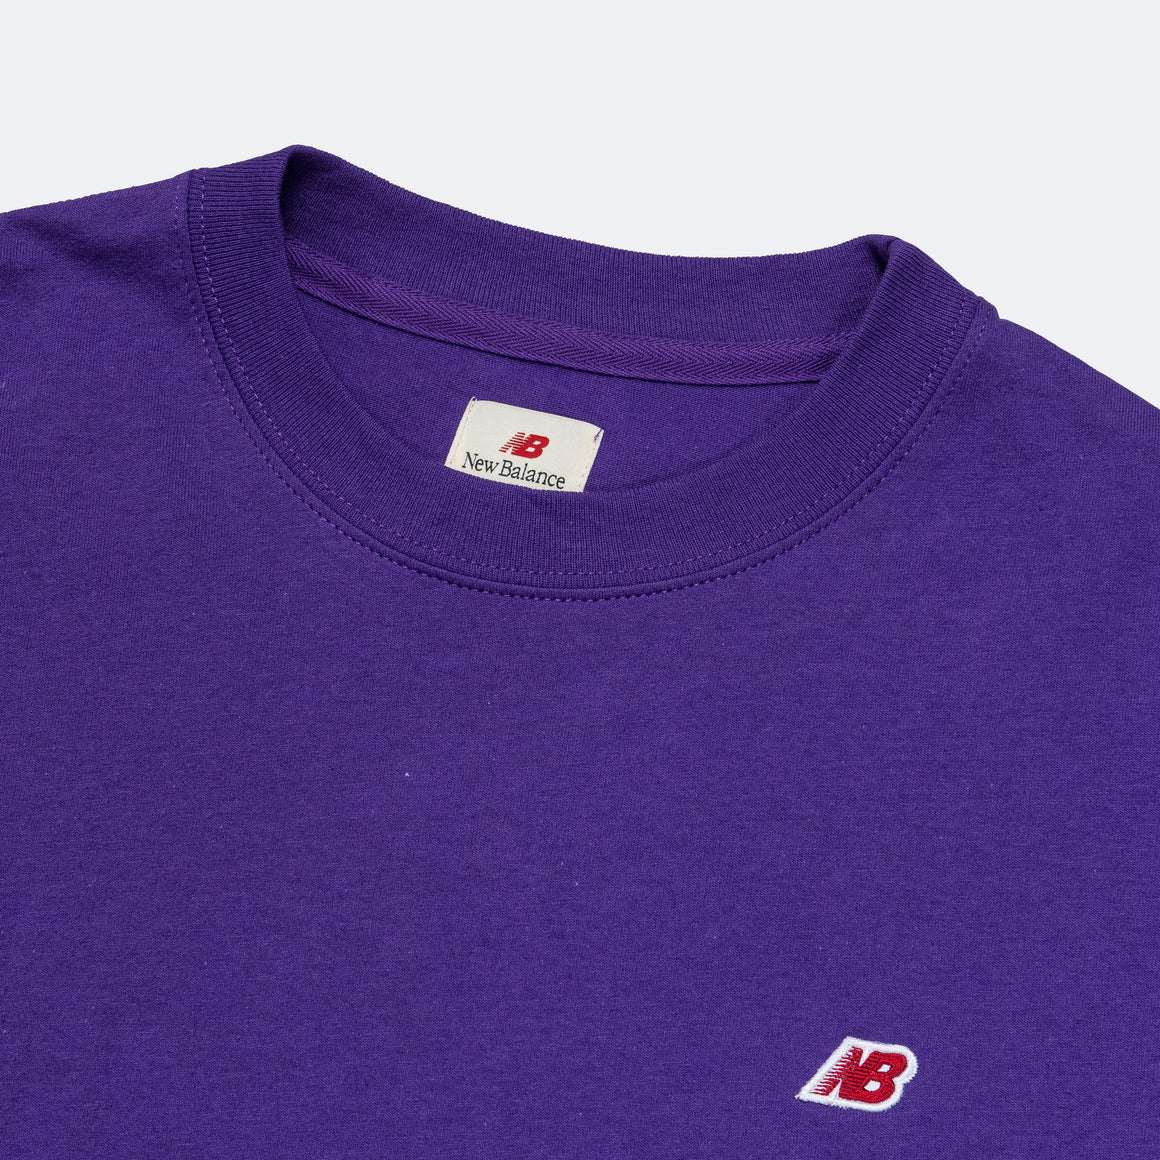 New Balance - MADE in USA Short Sleeve Tee - Prism Purple - UP THERE